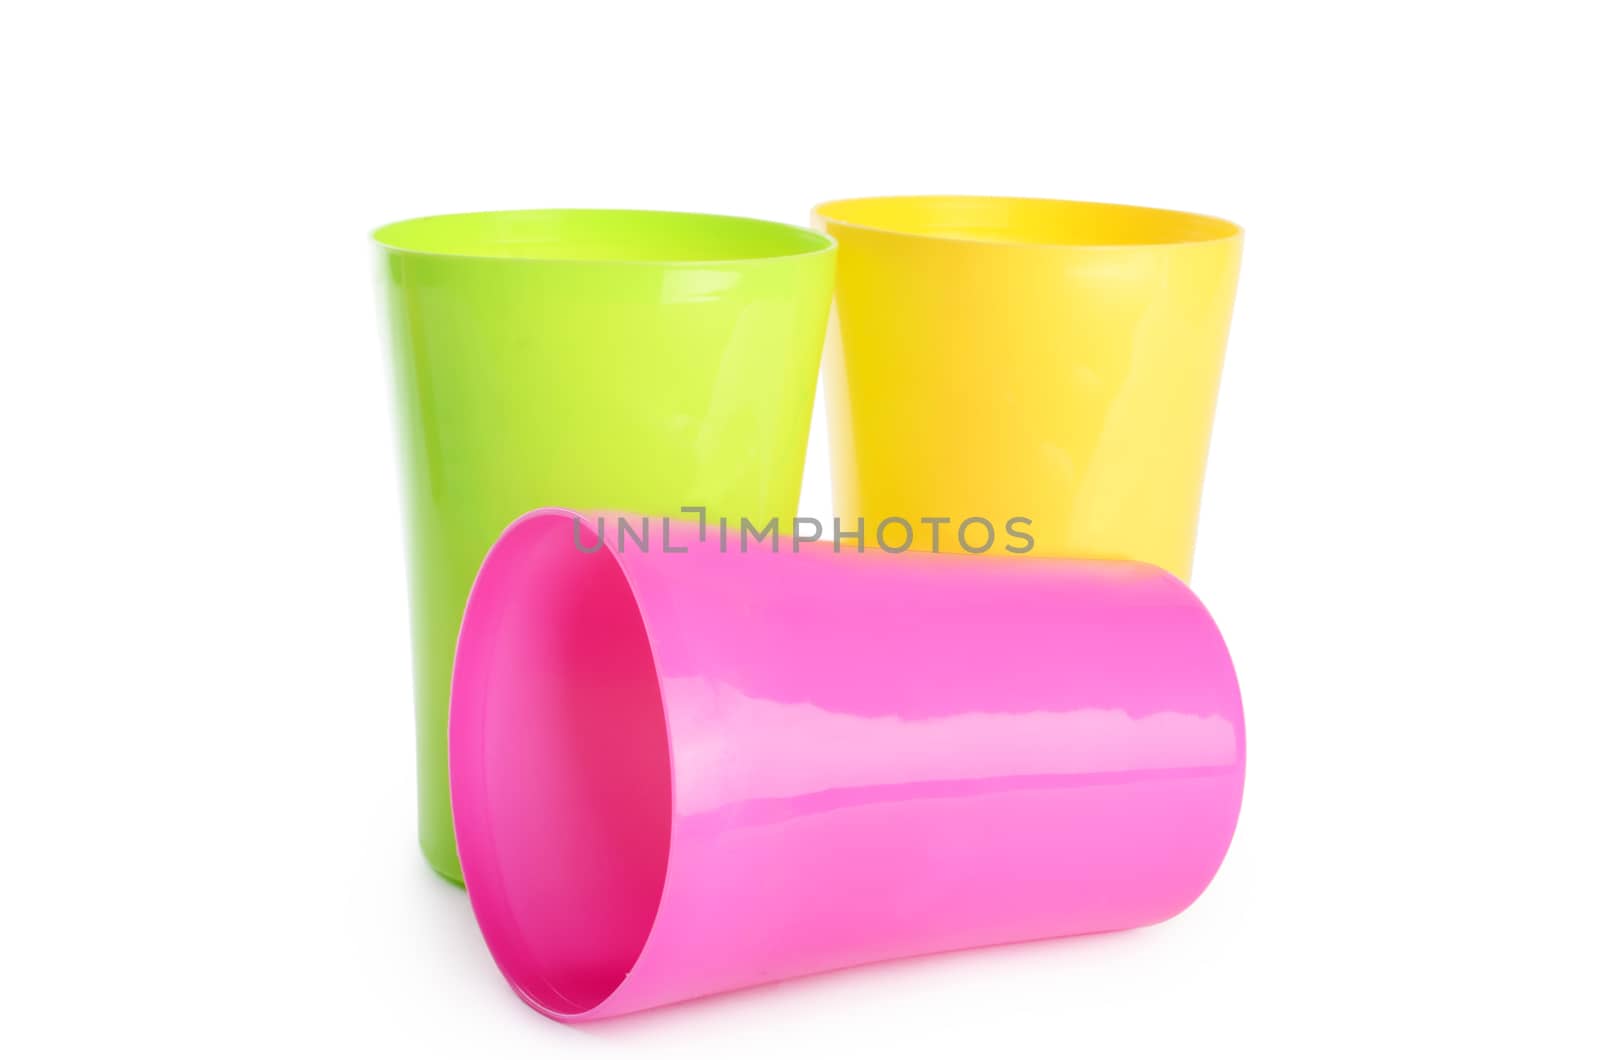 Plastic colorful cups isolated on white background